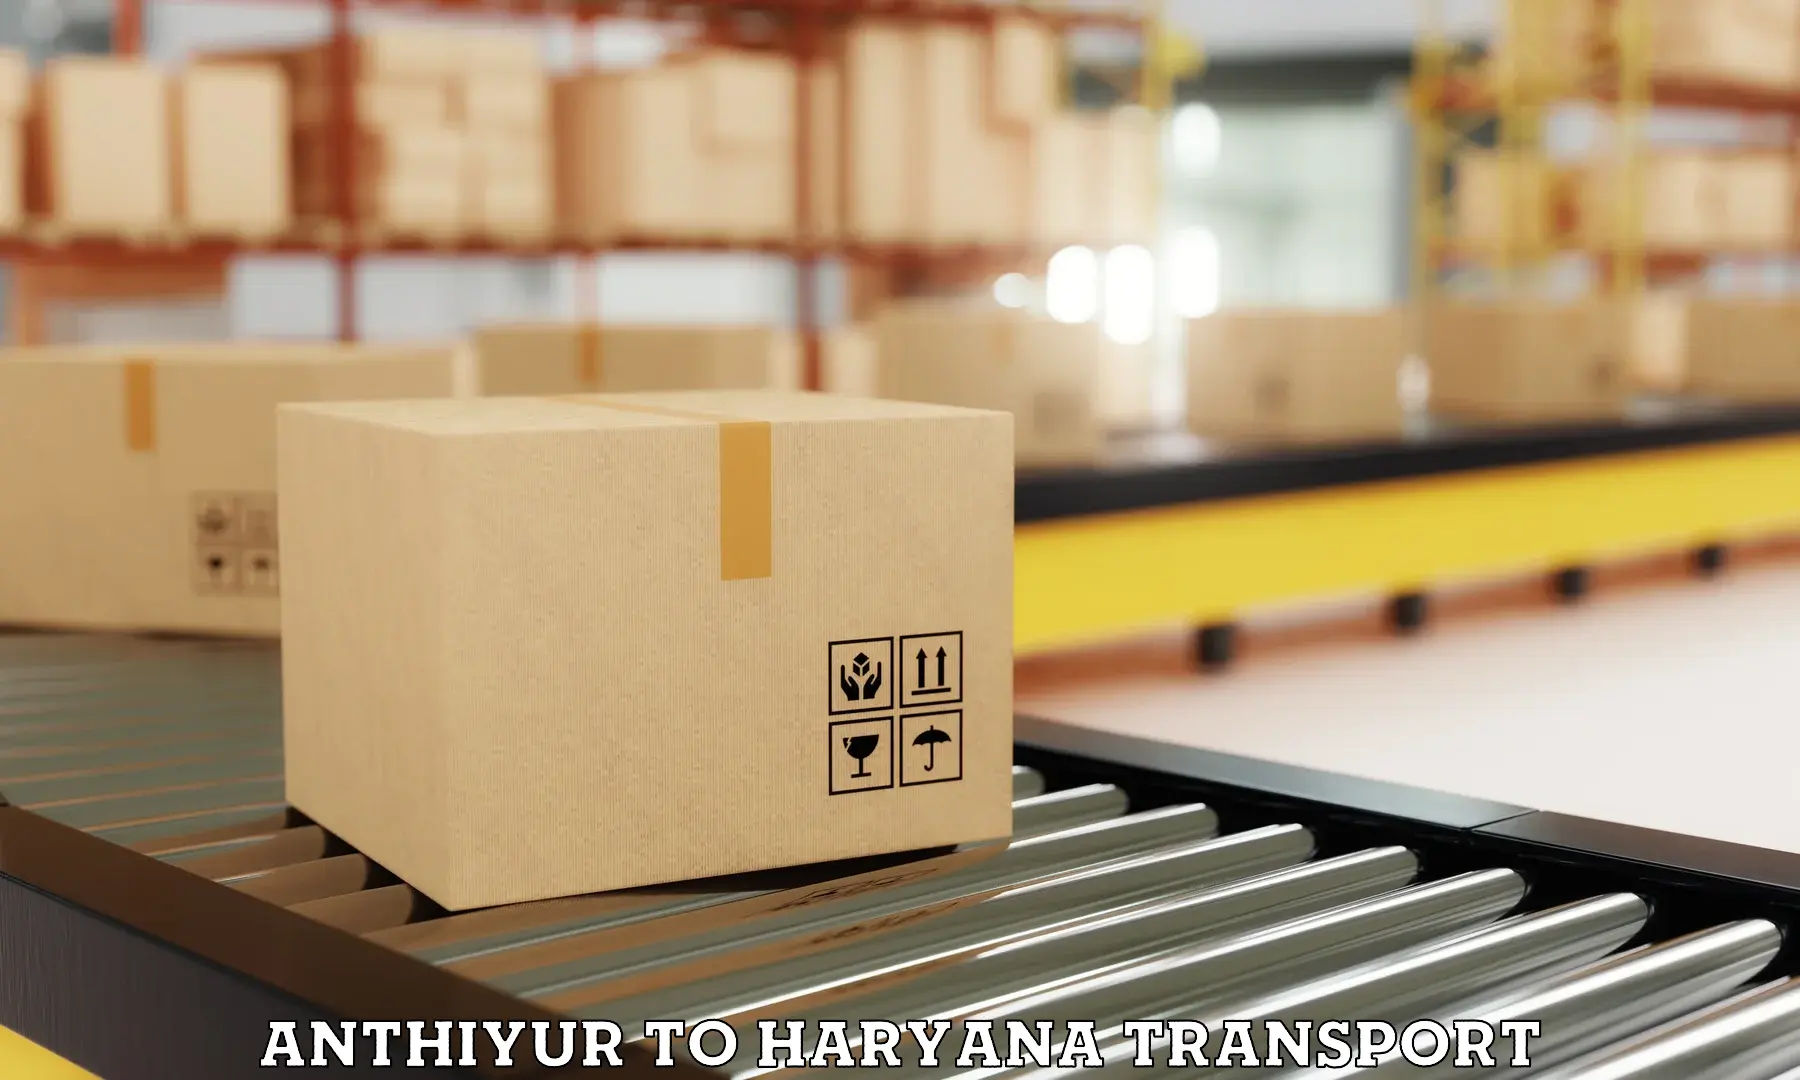 Commercial transport service Anthiyur to Meham